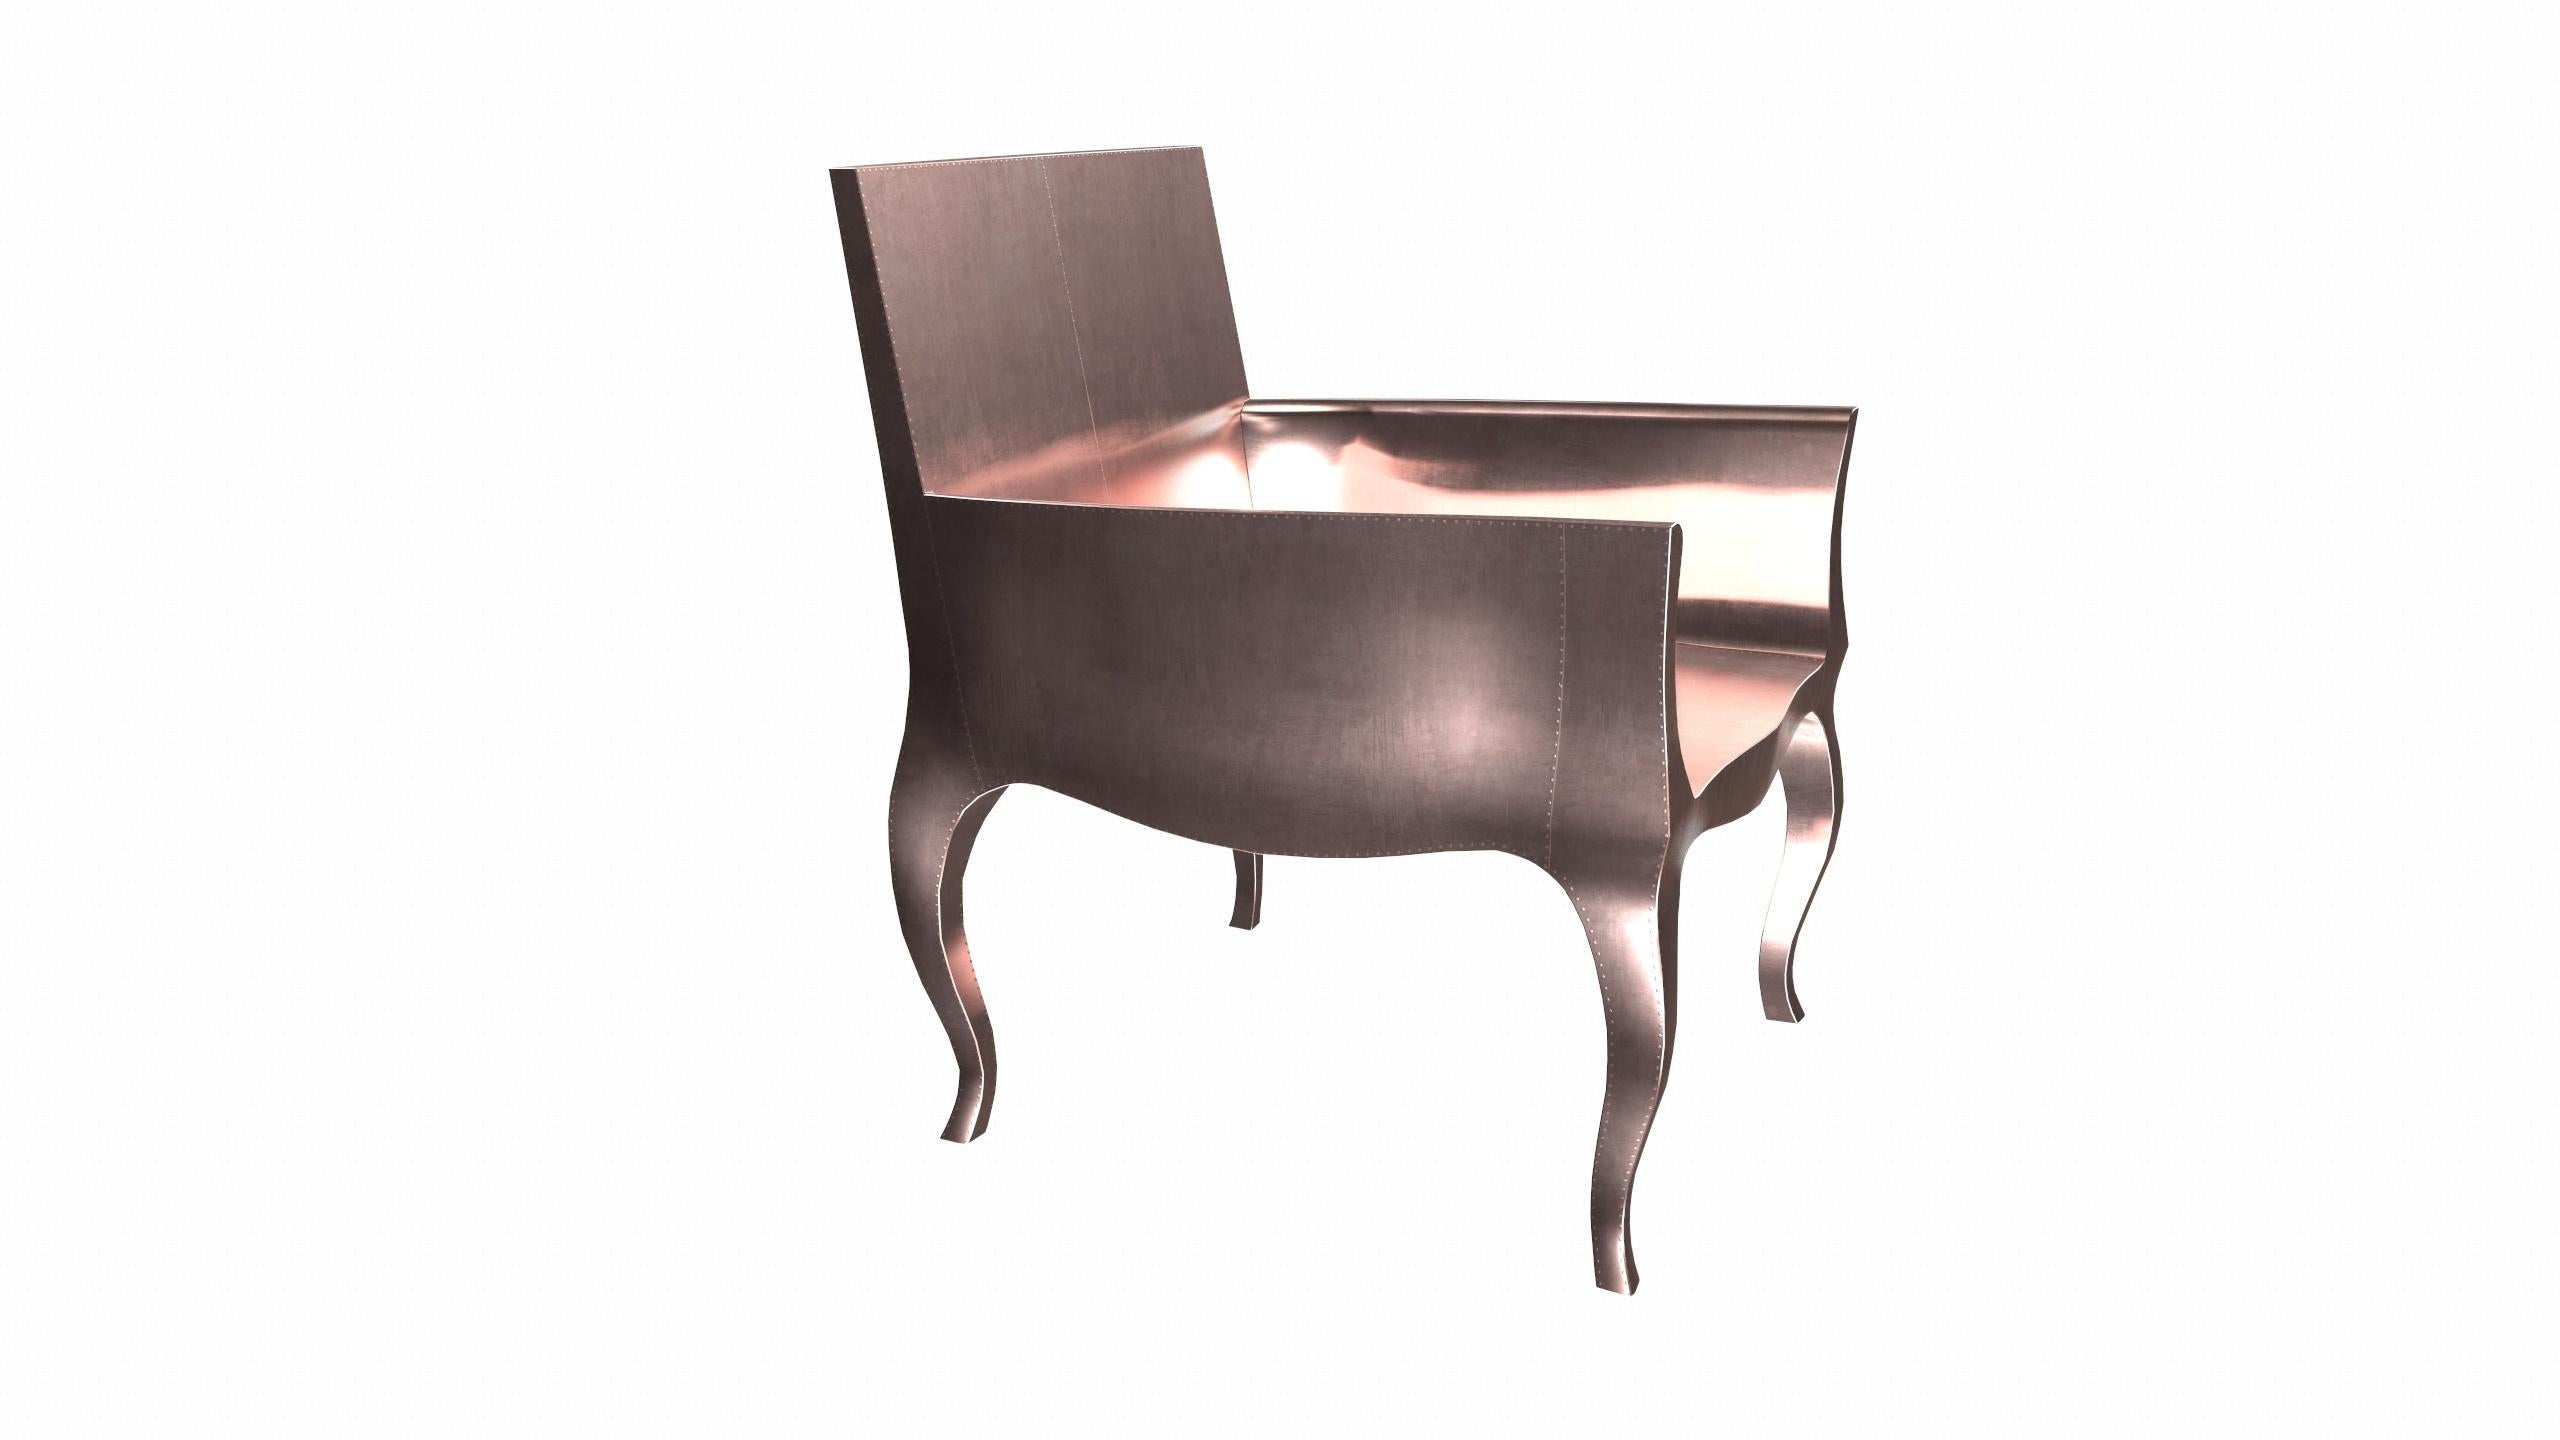 Indian Art Deco Office Chair in Smooth Copper by Paul Mathieu for S. Odegard For Sale